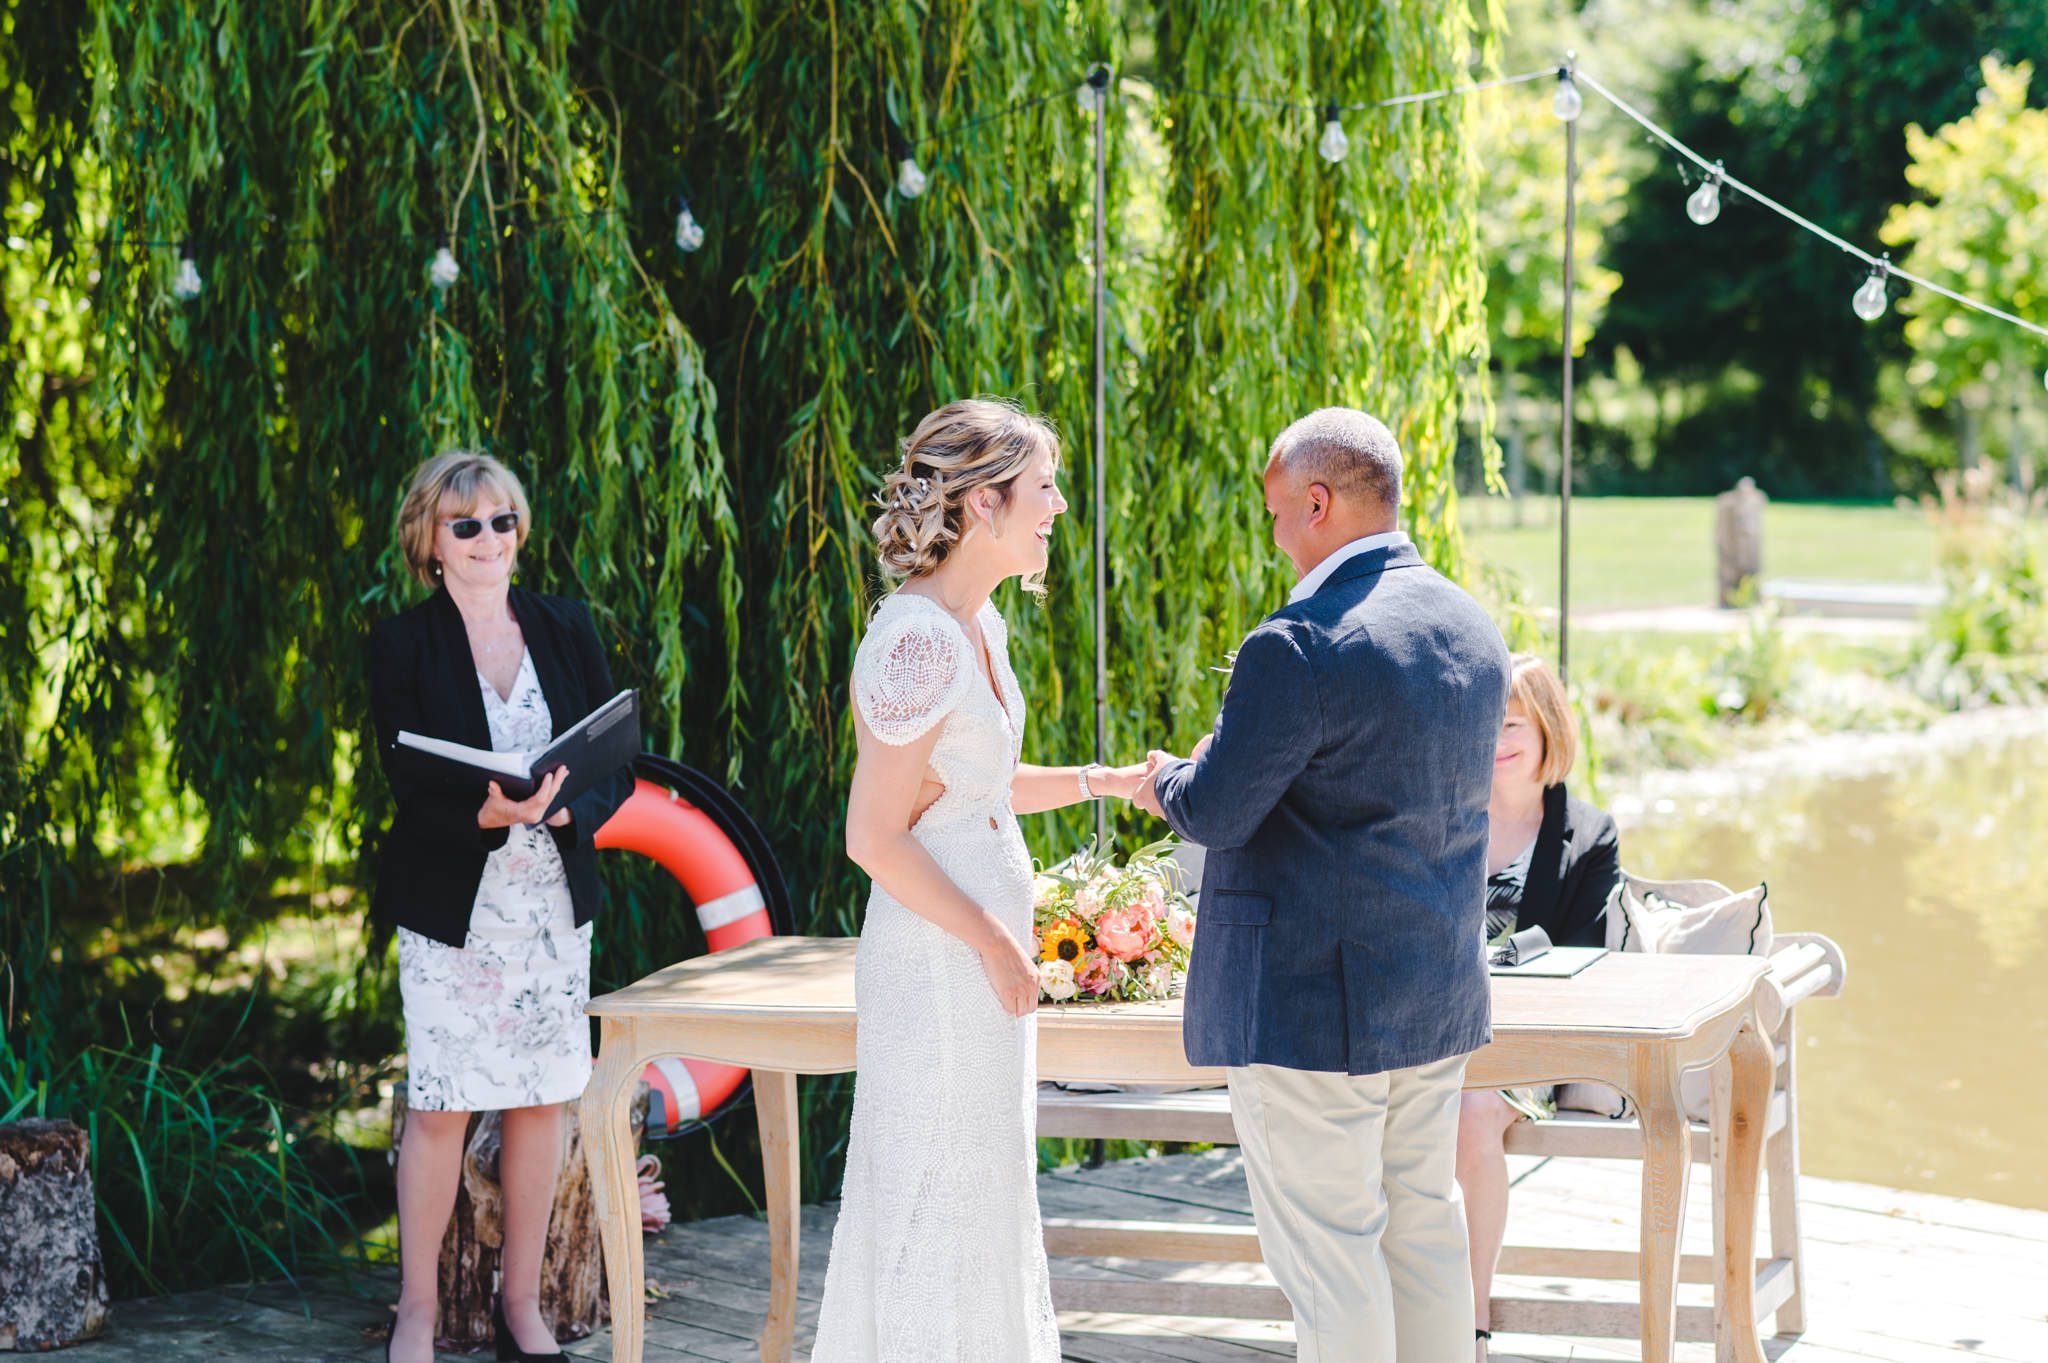 Ring exchange at a Barns and Yard wedding ceremony